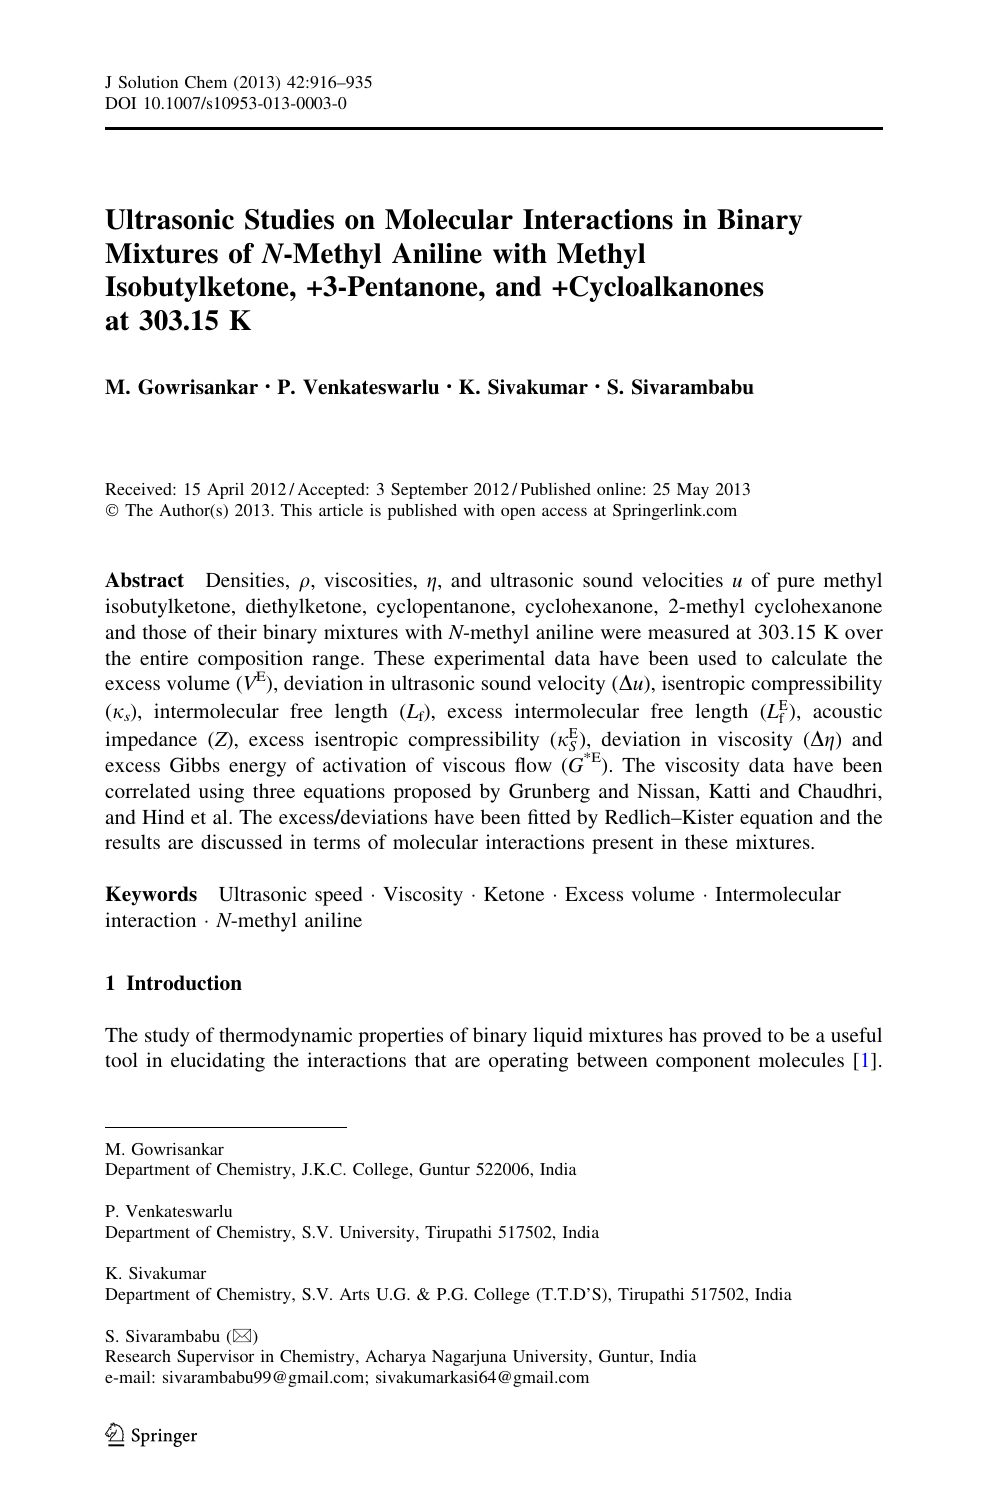 Ultrasonic Studies On Molecular Interactions In Binary Mixtures Of N Methyl Aniline With Methyl Isobutylketone 3 Pentanone And Cycloalkanones At 303 15 K Topic Of Research Paper In Chemical Sciences Download Scholarly Article Pdf